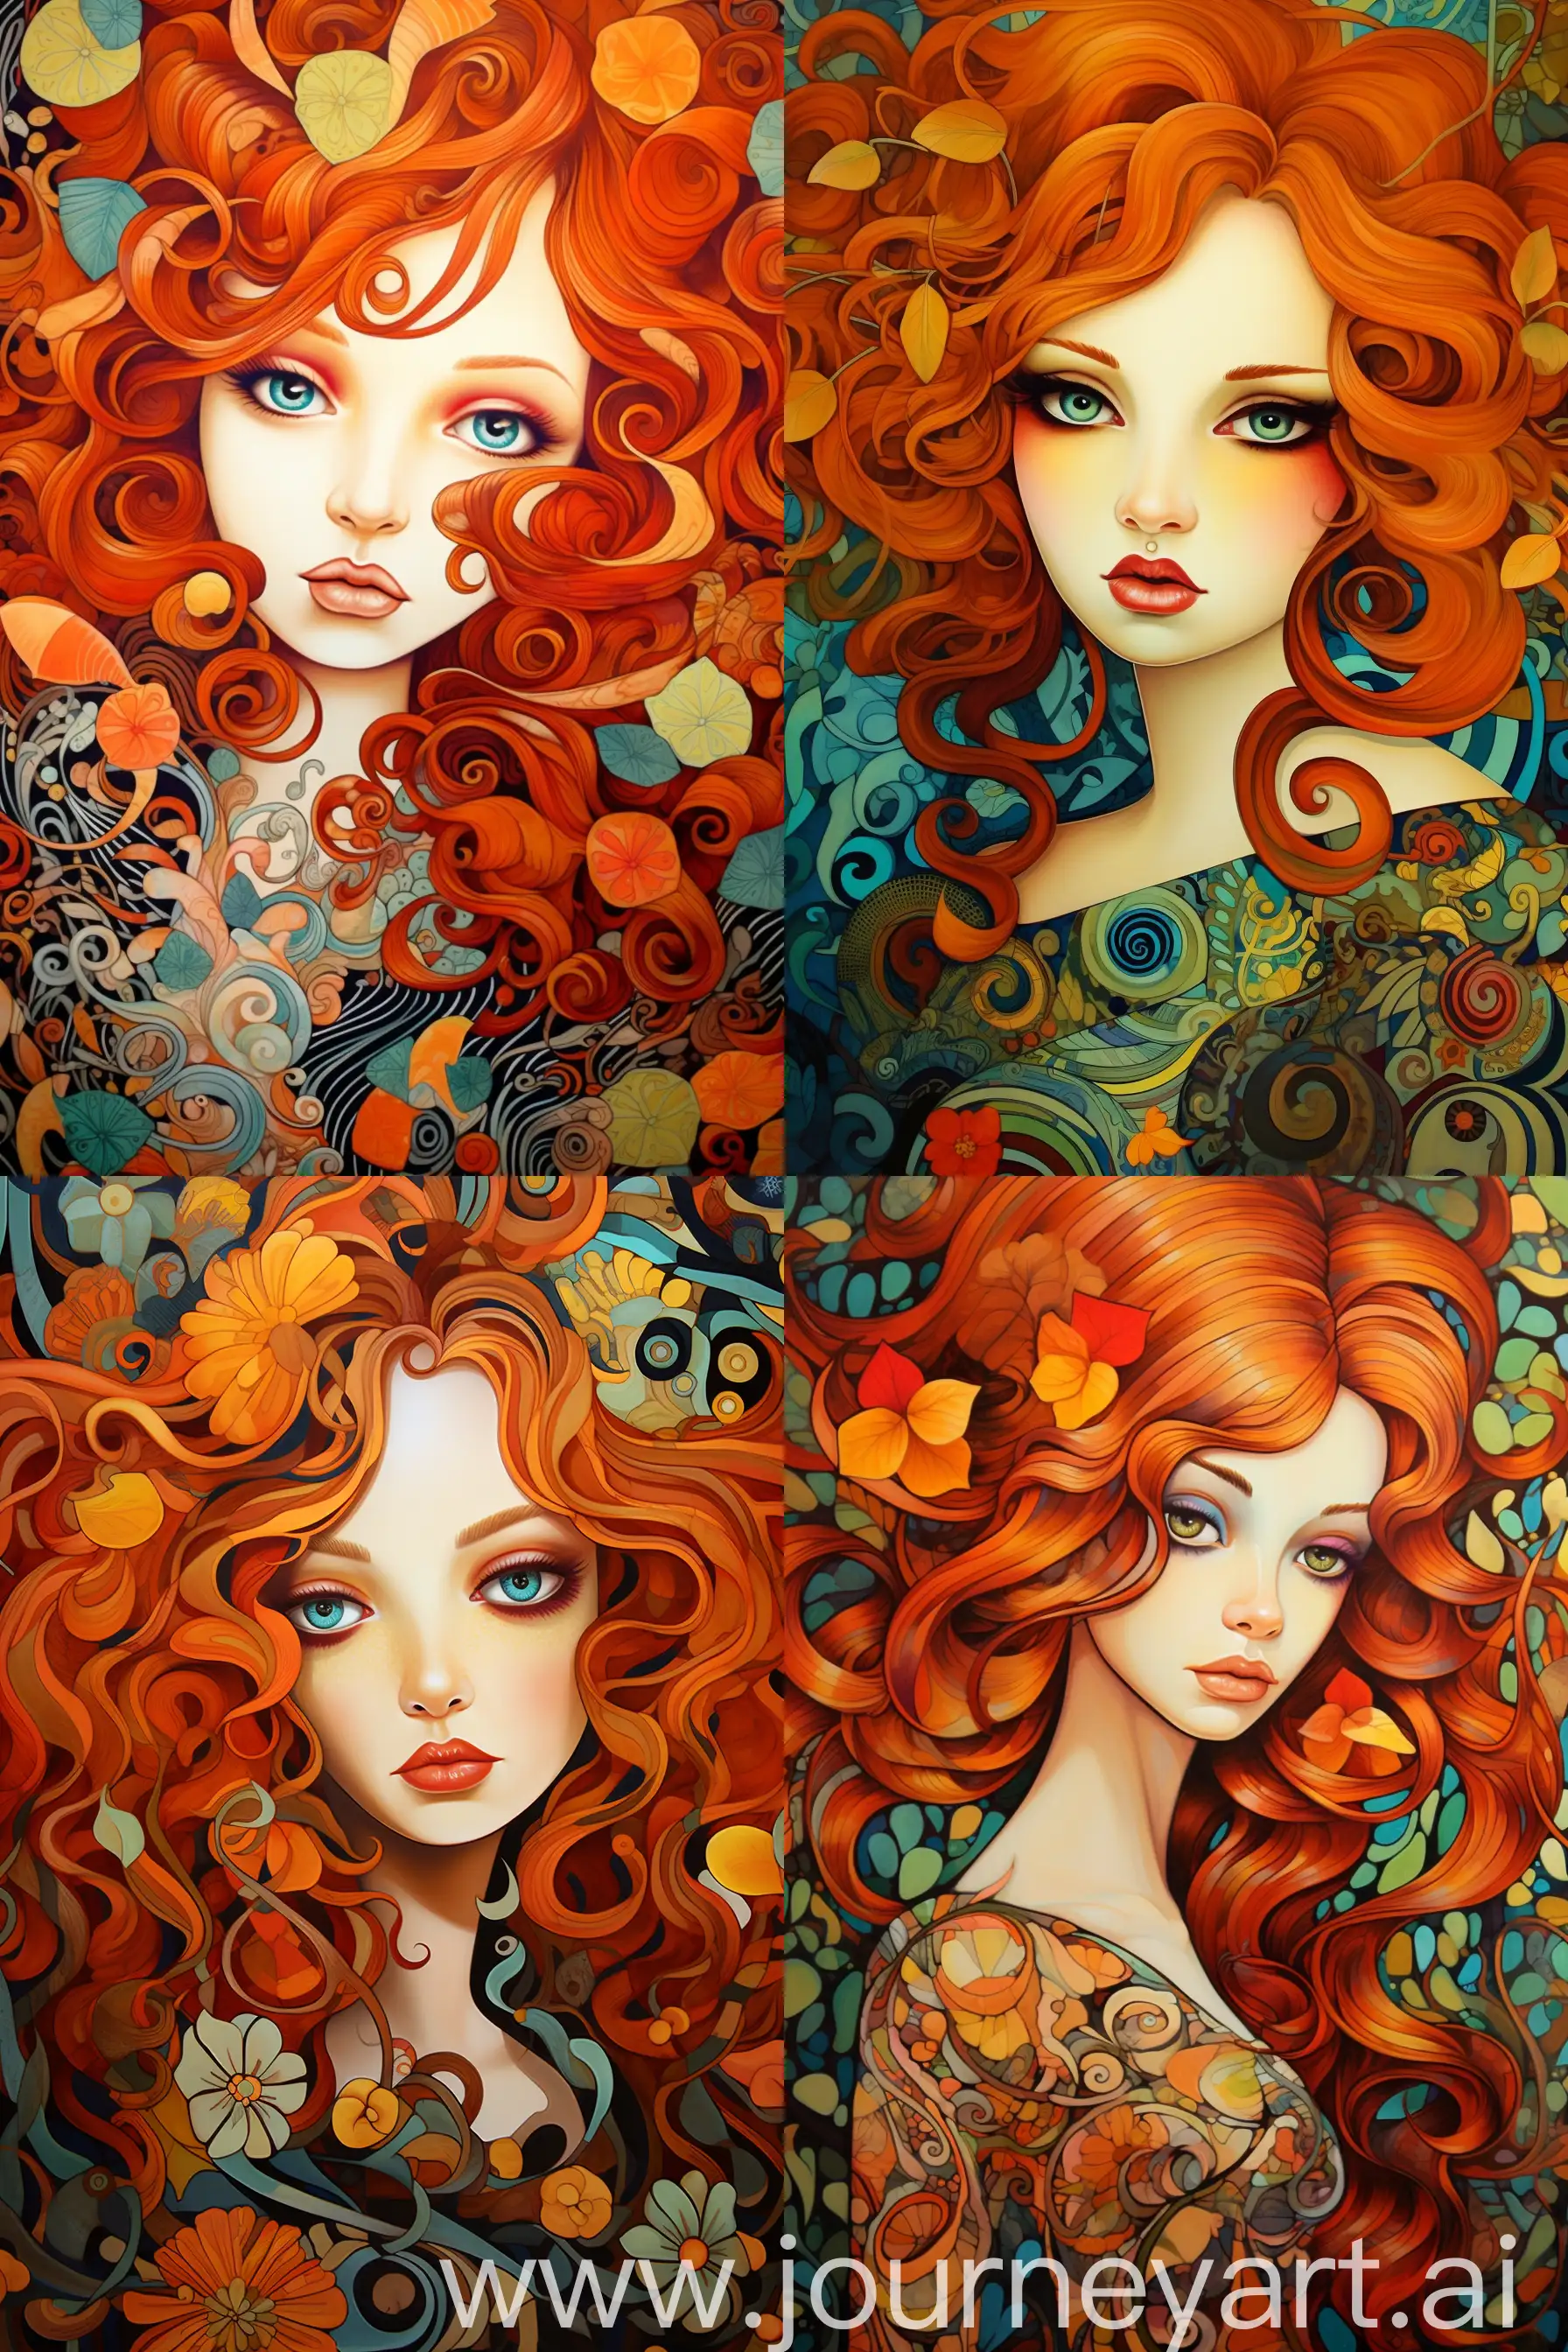 Charming-RedHaired-Woman-in-Art-Deco-Style-with-Fallinspired-Hair